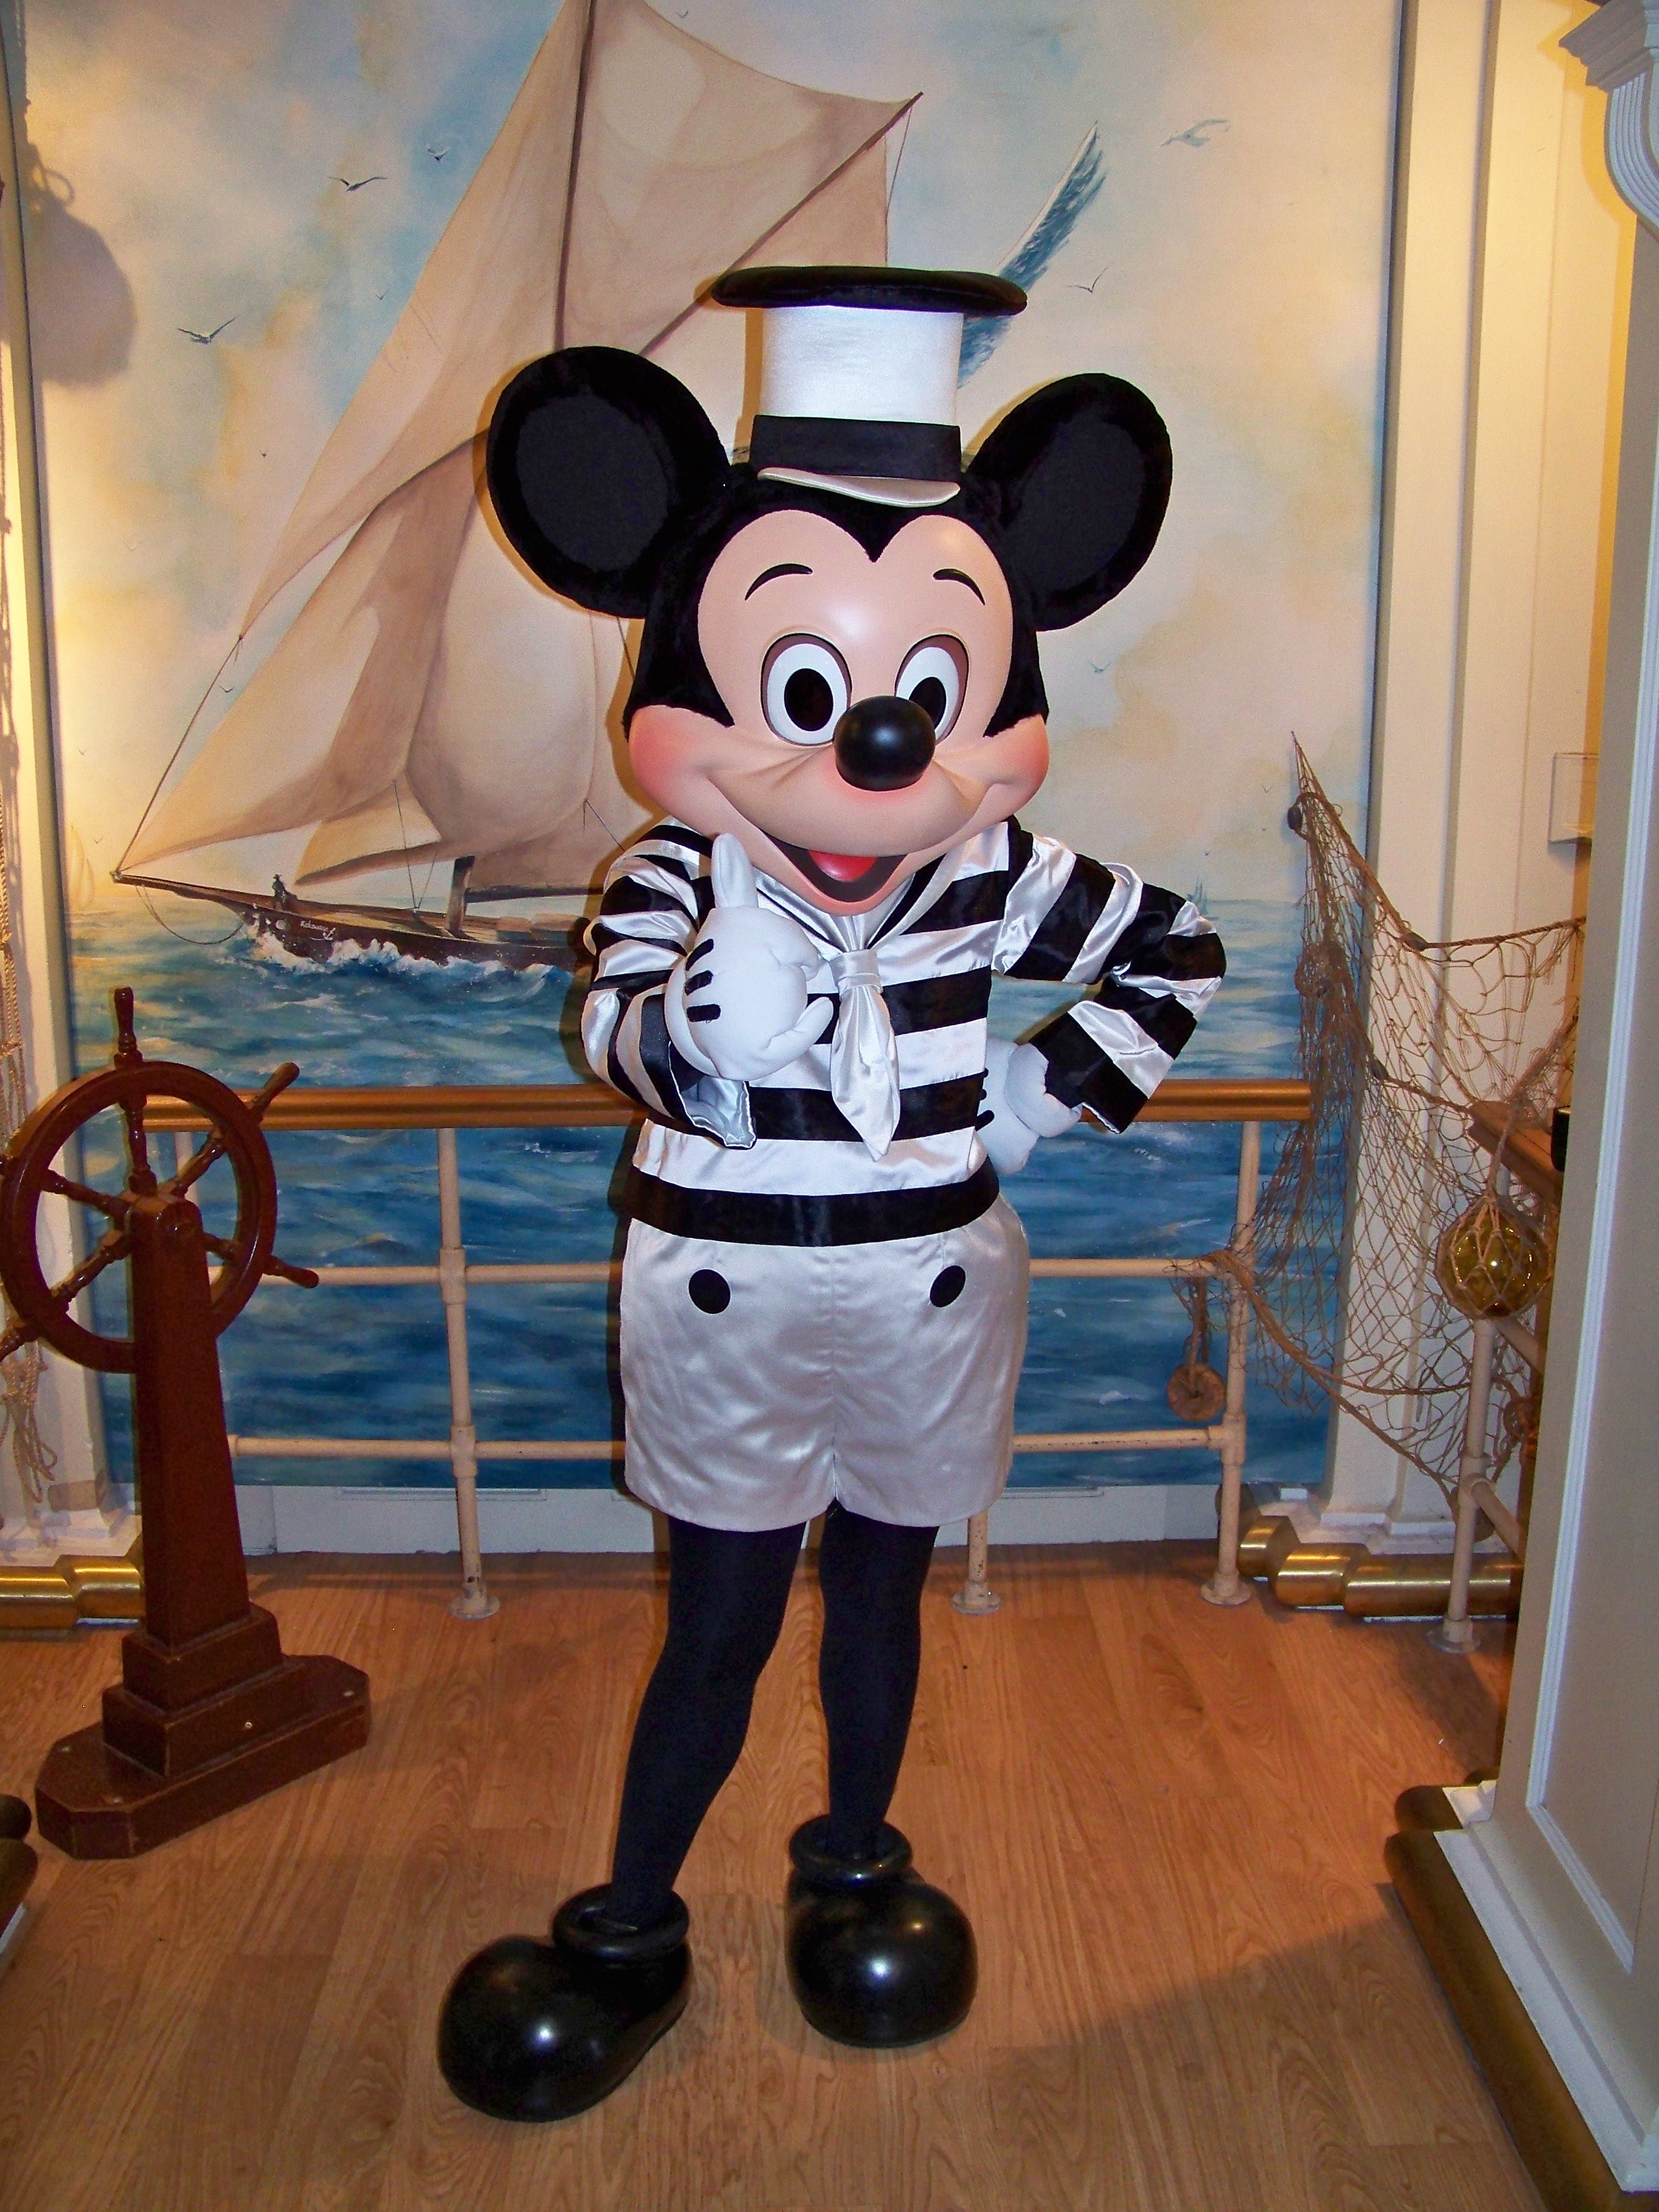 Disneyland Paris, Characters, Mickey Mouse